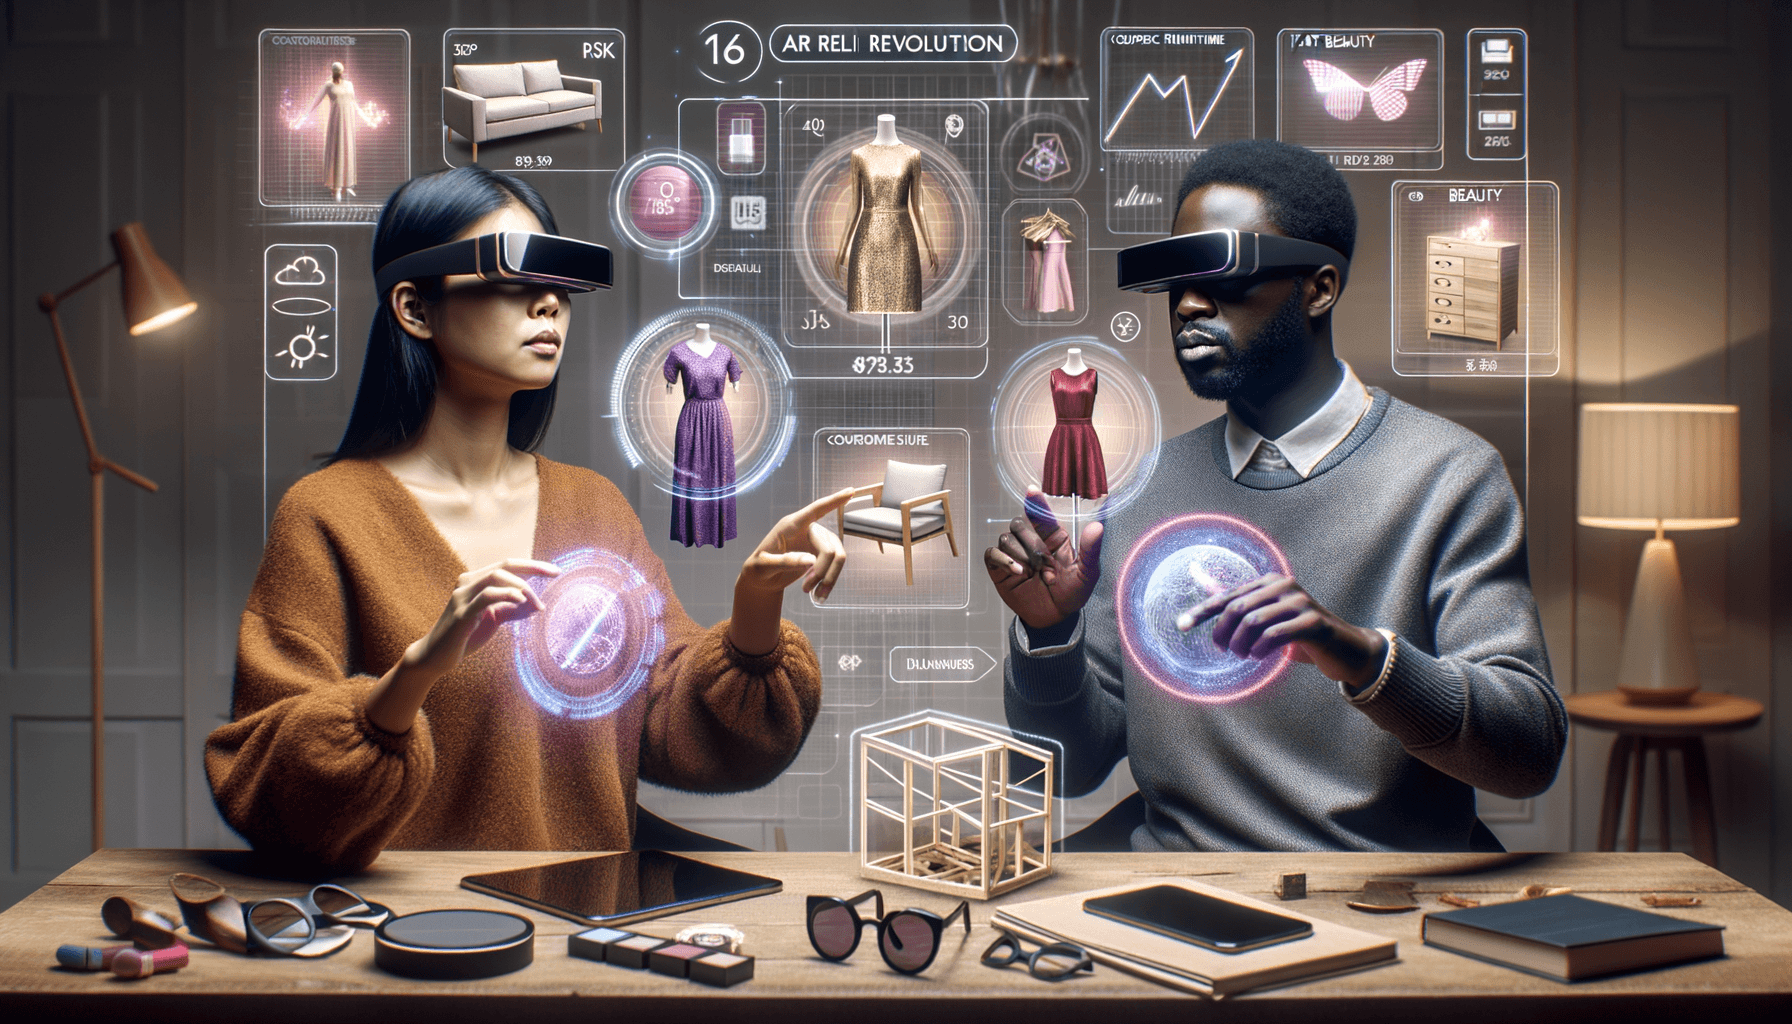 "Experience the Future of Shopping with Augmented Reality – Revolutionizing Retail Through Personalized Customization and Innovative Brands Like IKEA, Sephora, & Nike."